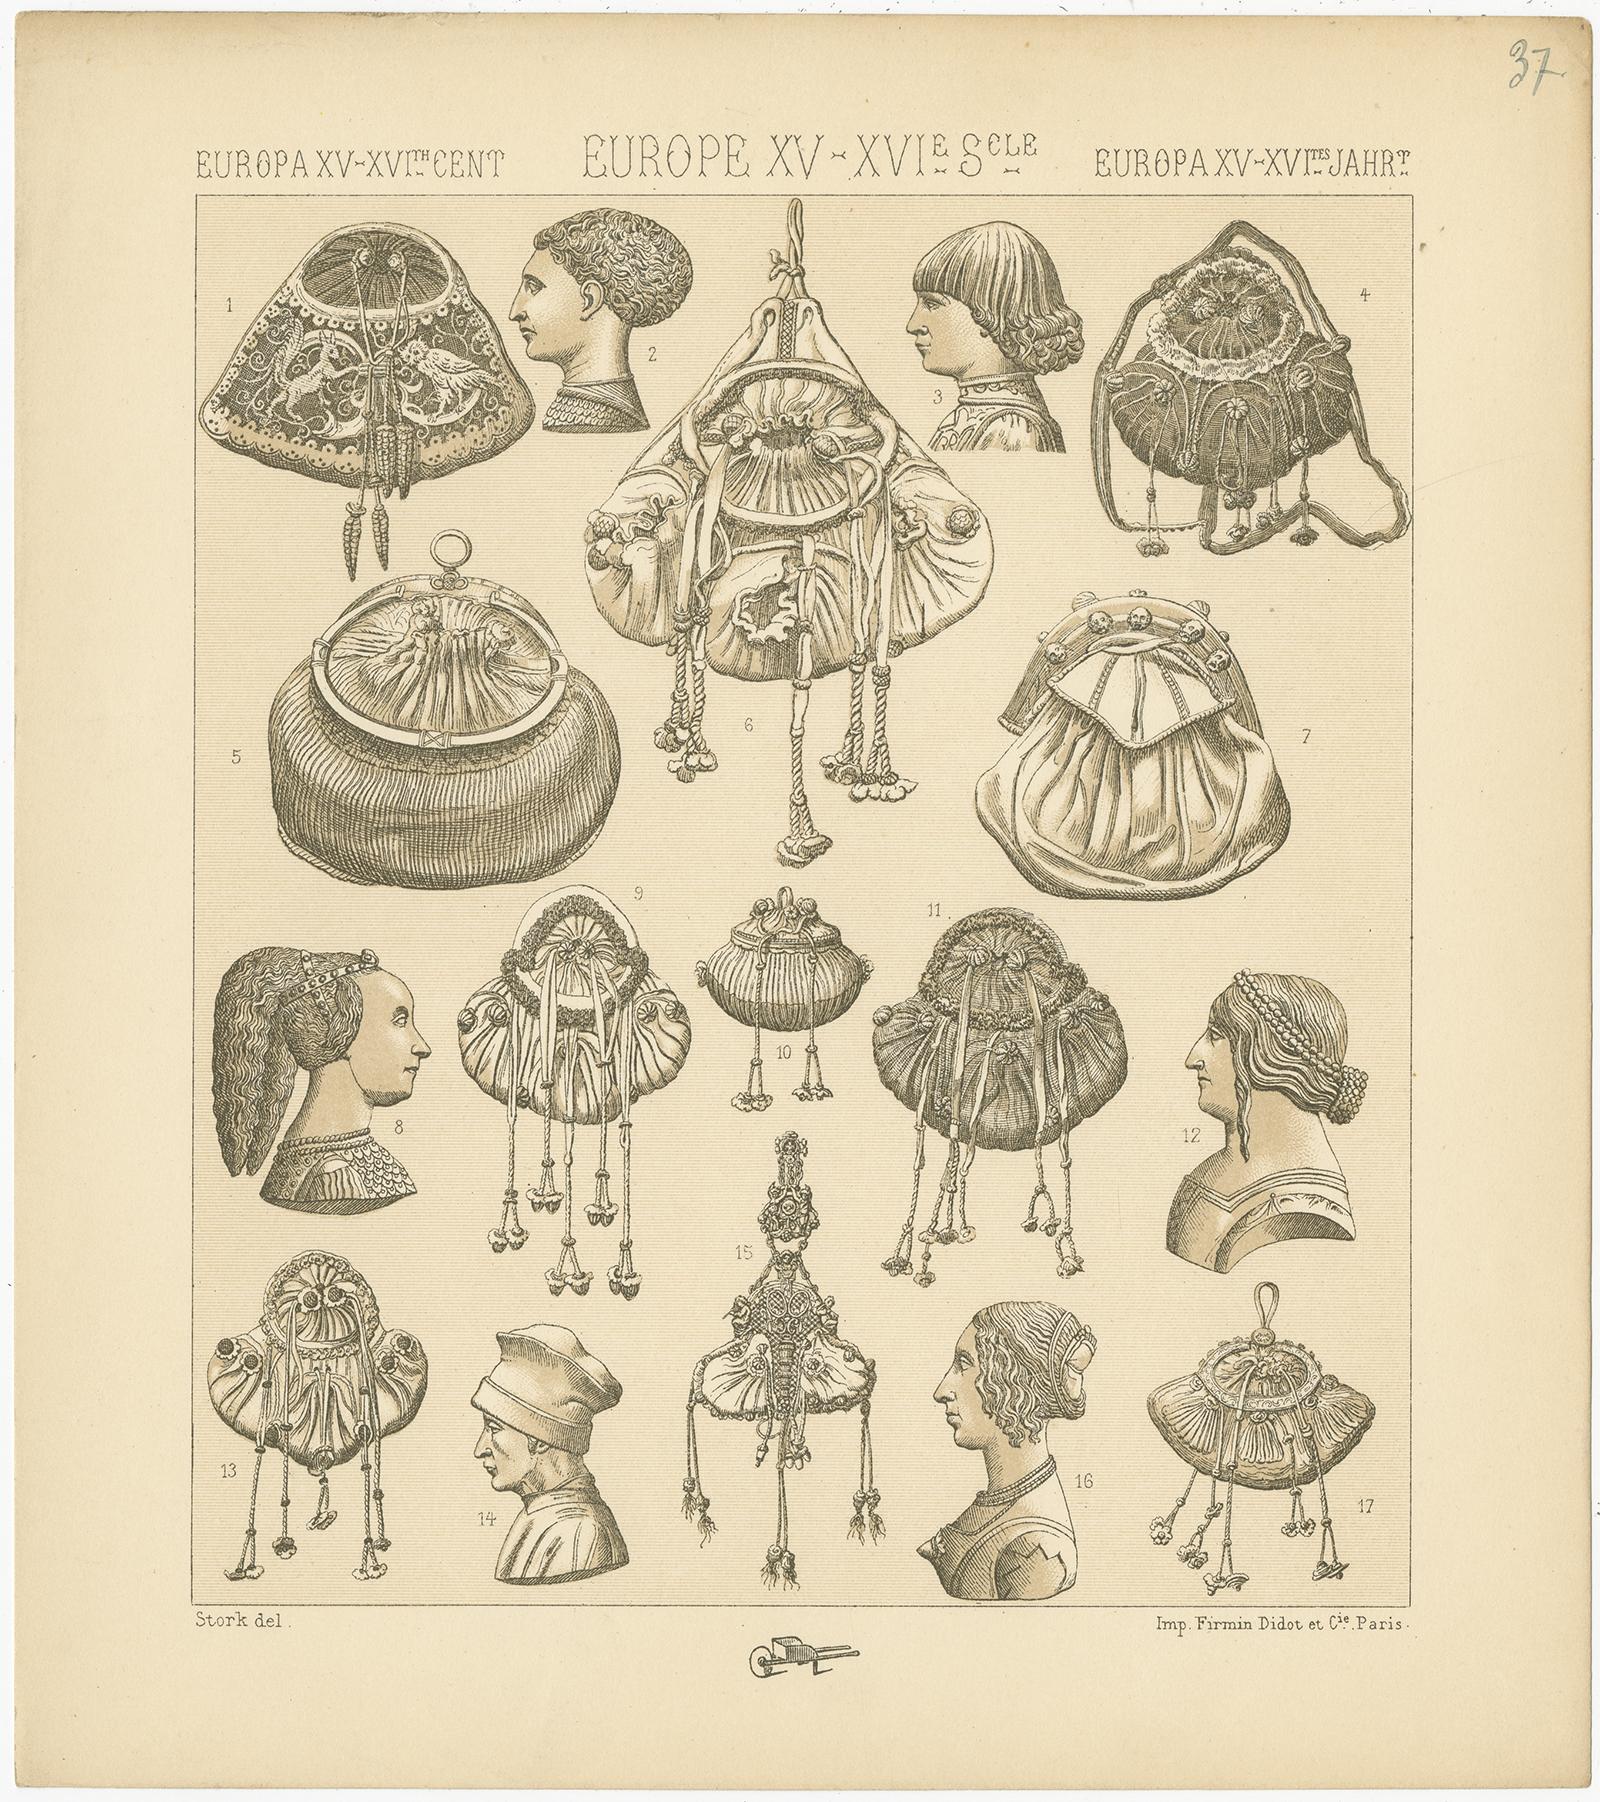 19th Century Pl 37 Antique Print of European 15th-16th Century Decorative Objects by Racinet For Sale